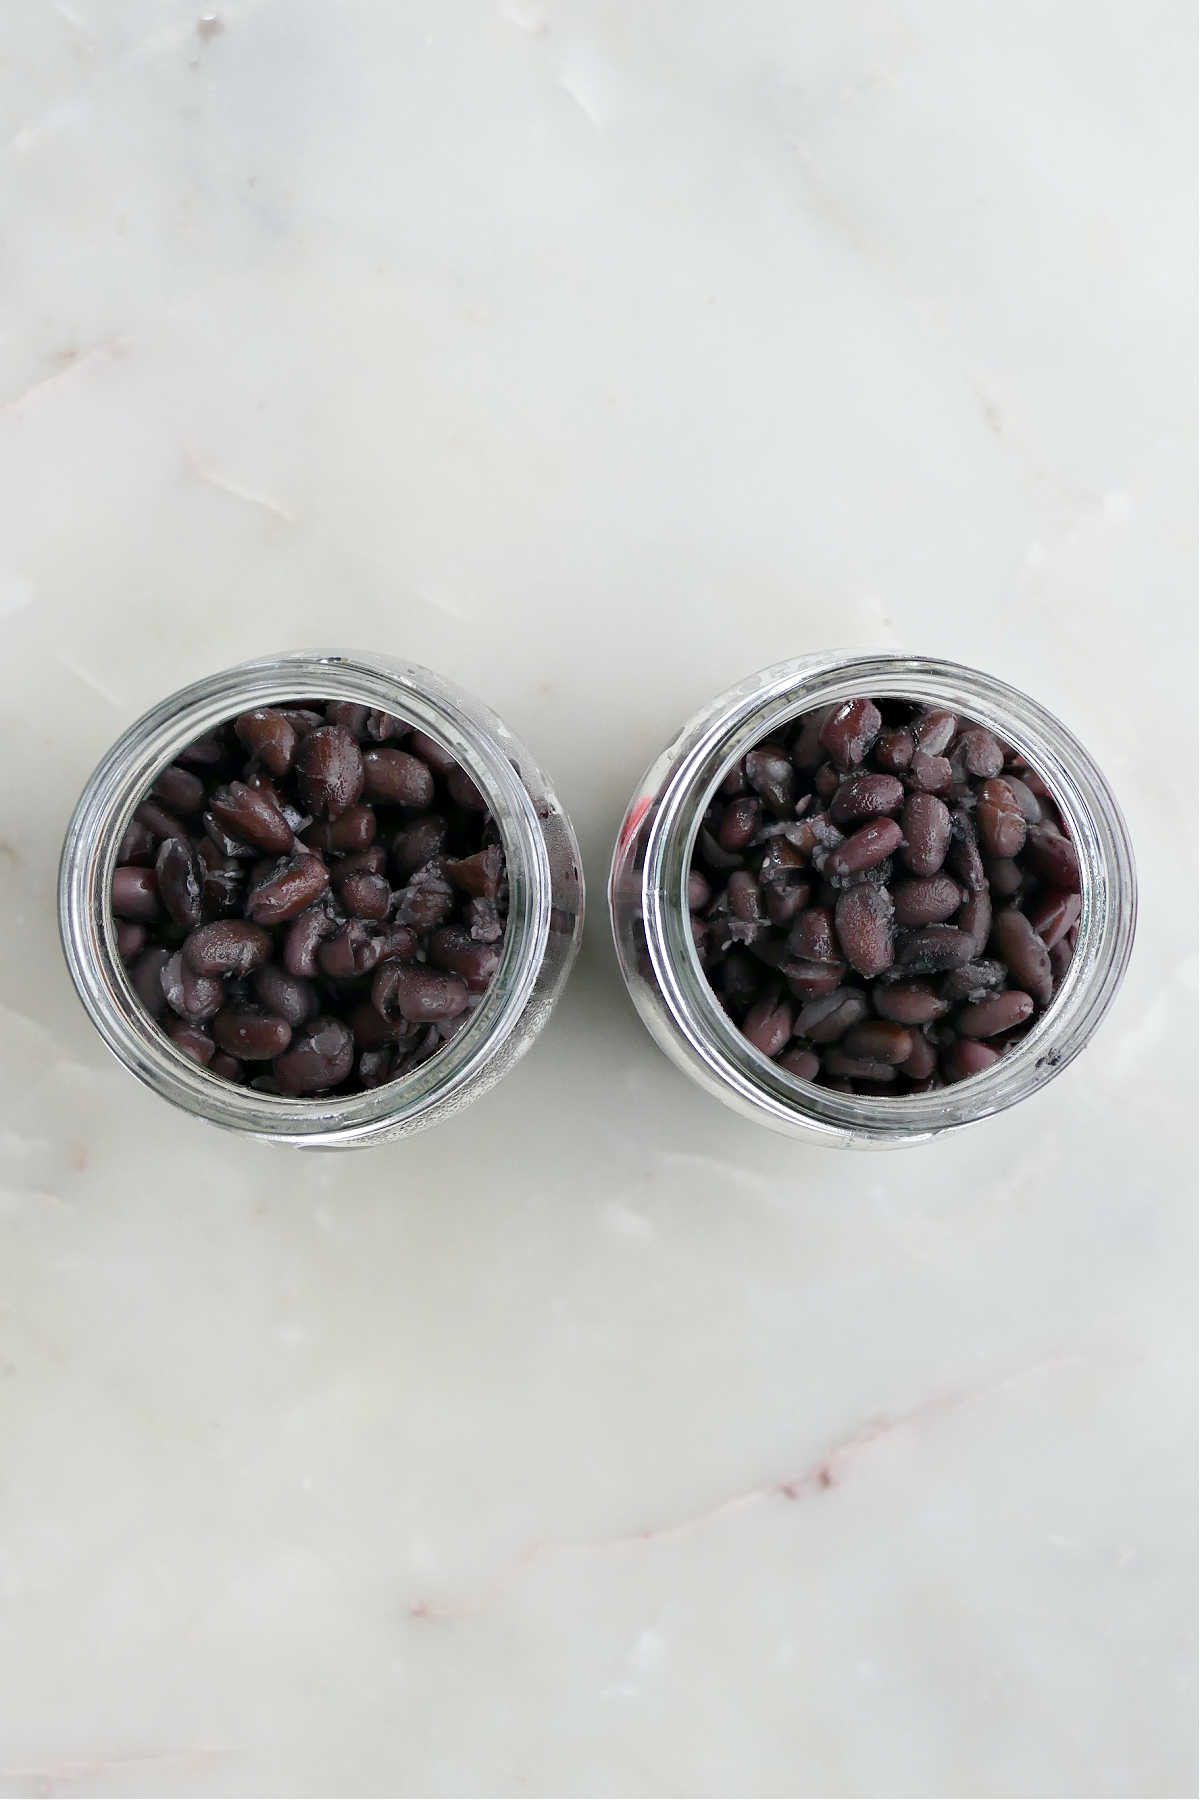 Two mason jars of stove top cooked black beans.